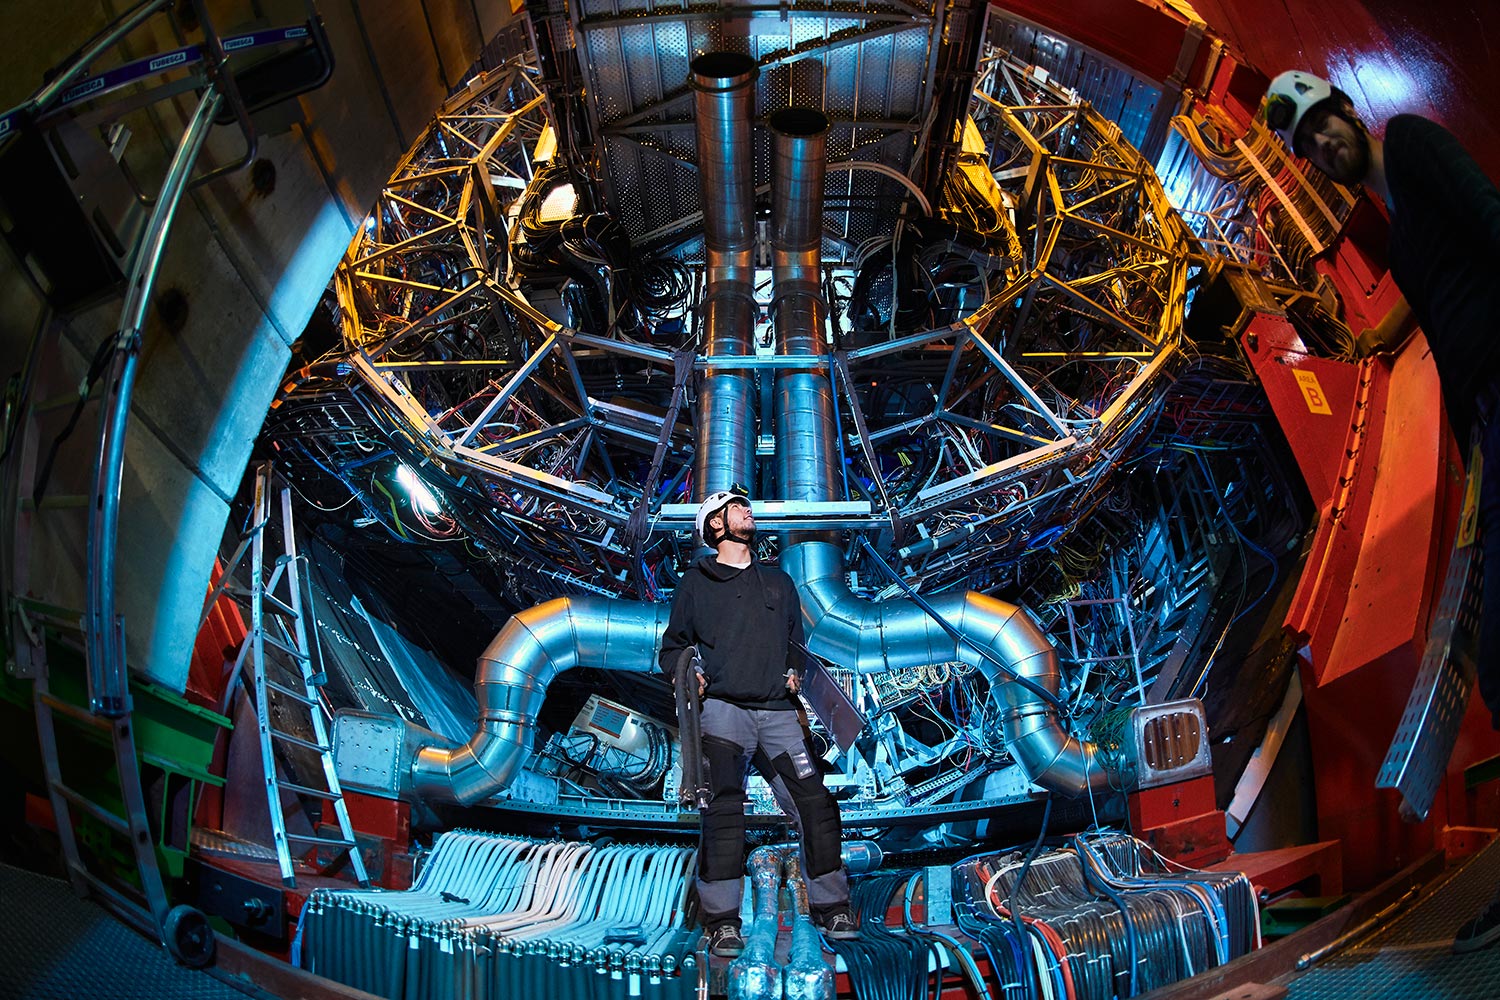 helmeted person stands inside inner workings at CERN